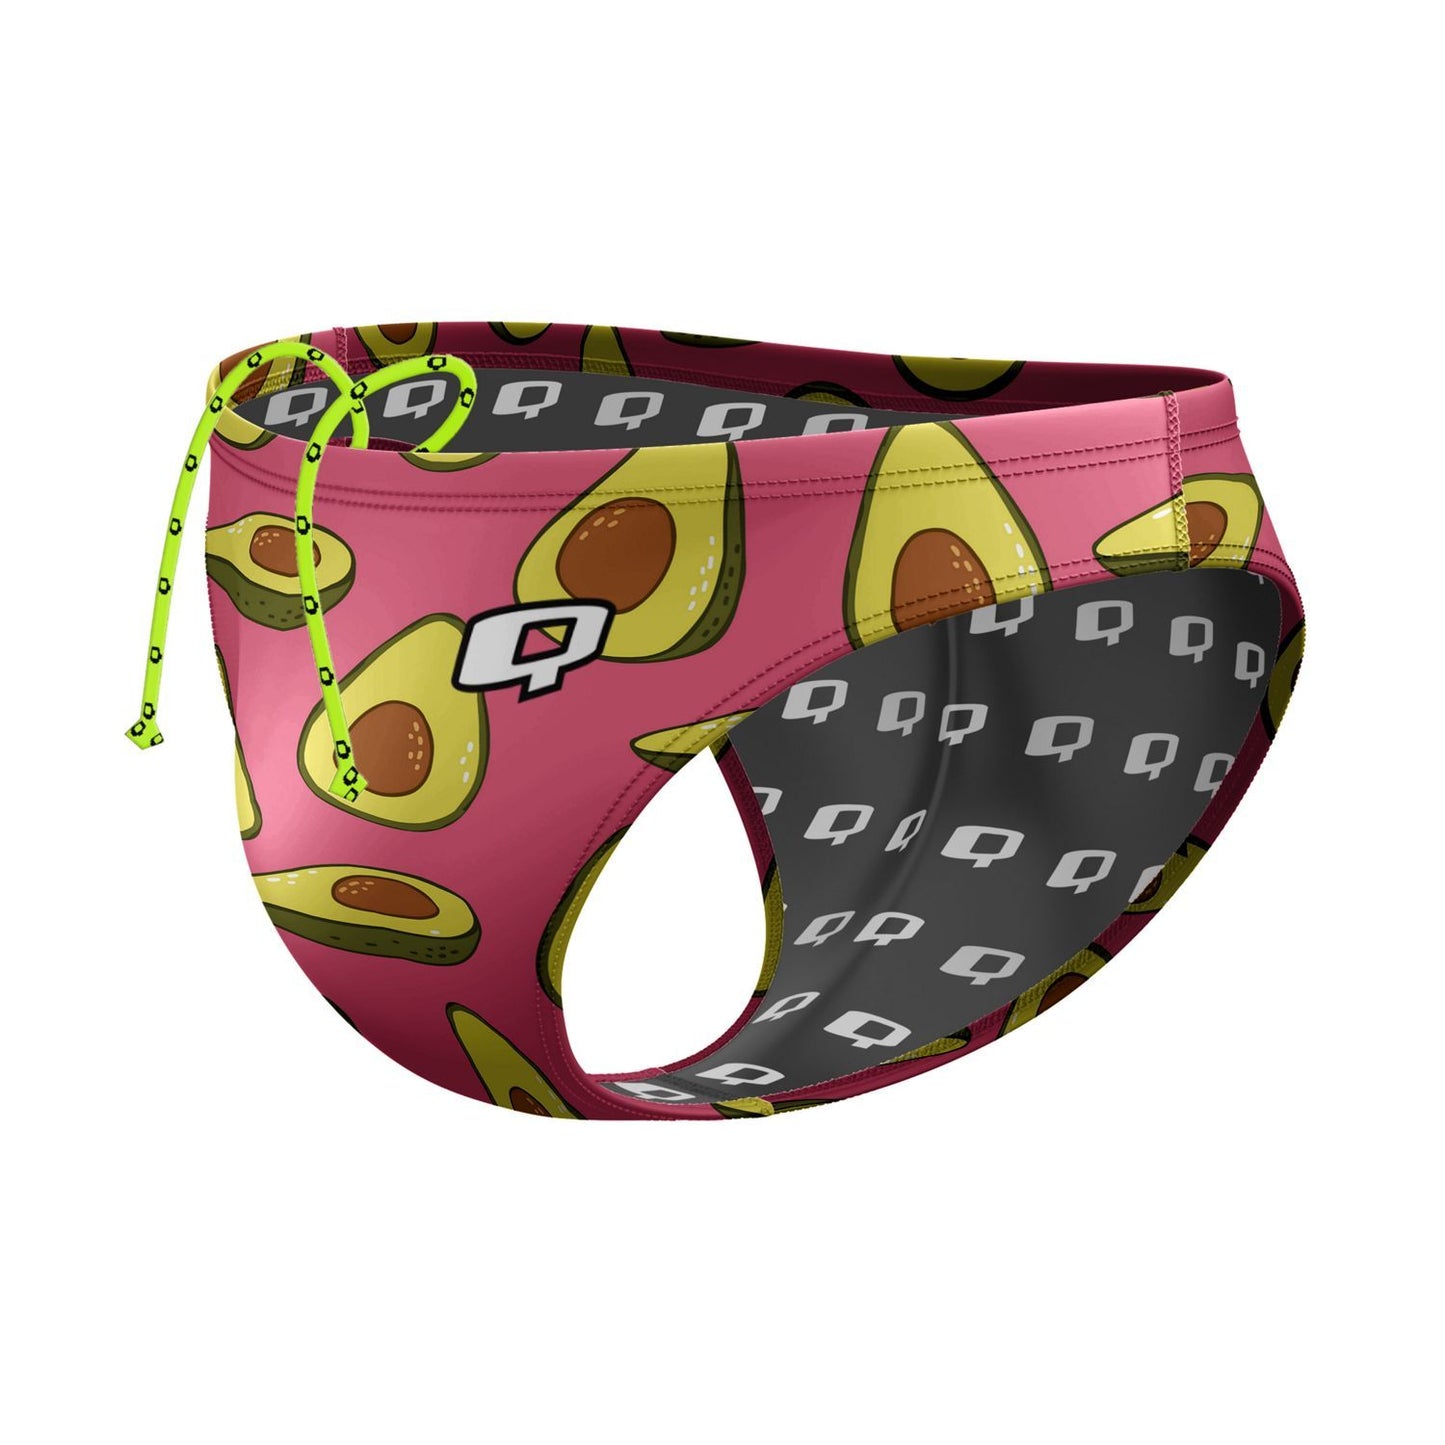 Toasted Waterpolo Brief